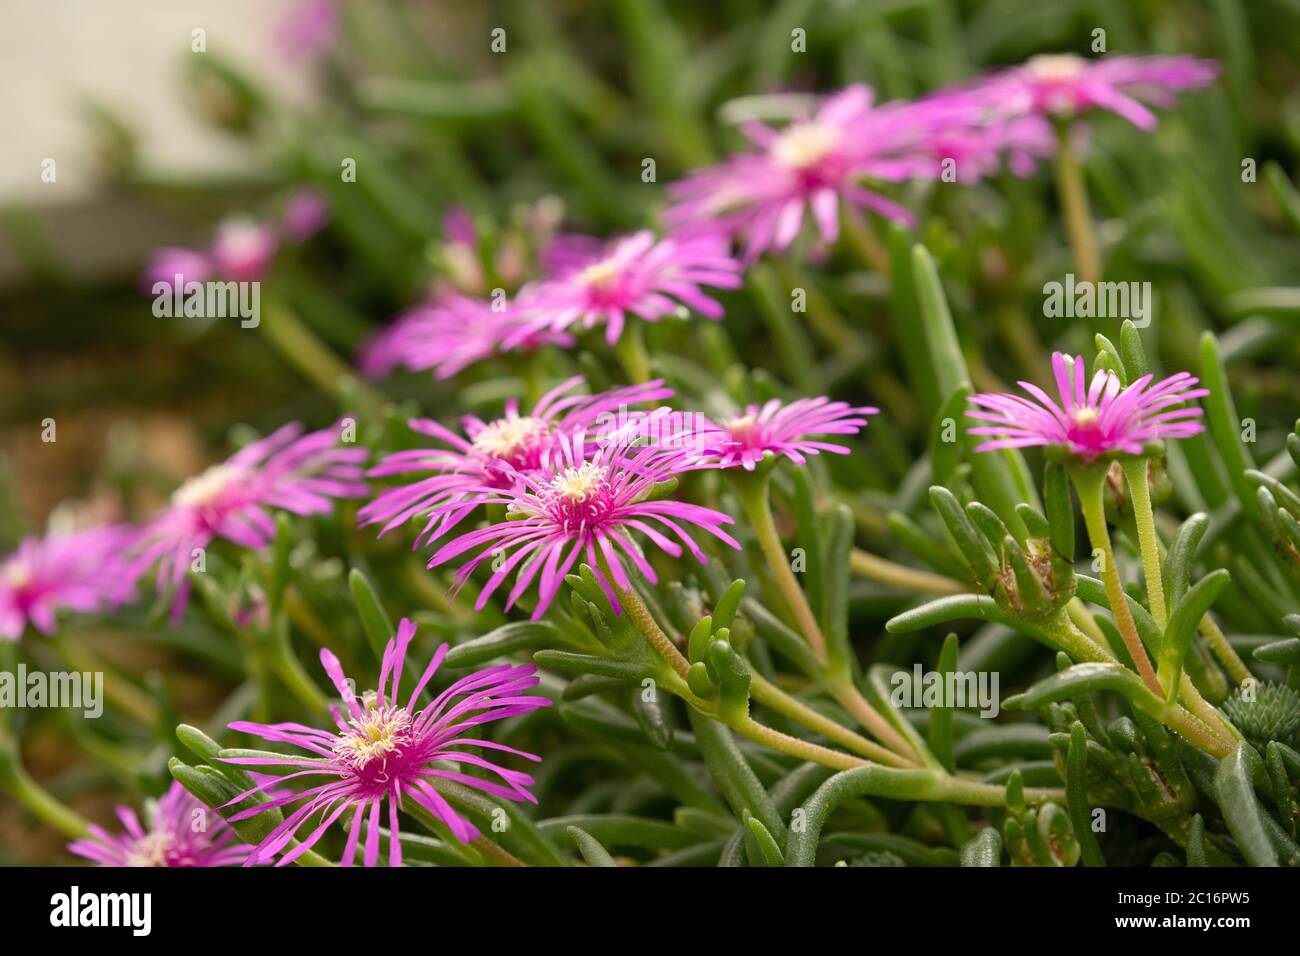 Pink Cooper's ice plant with long thin petals, Harrogate, North Yorkshire, England, UK. Stock Photo